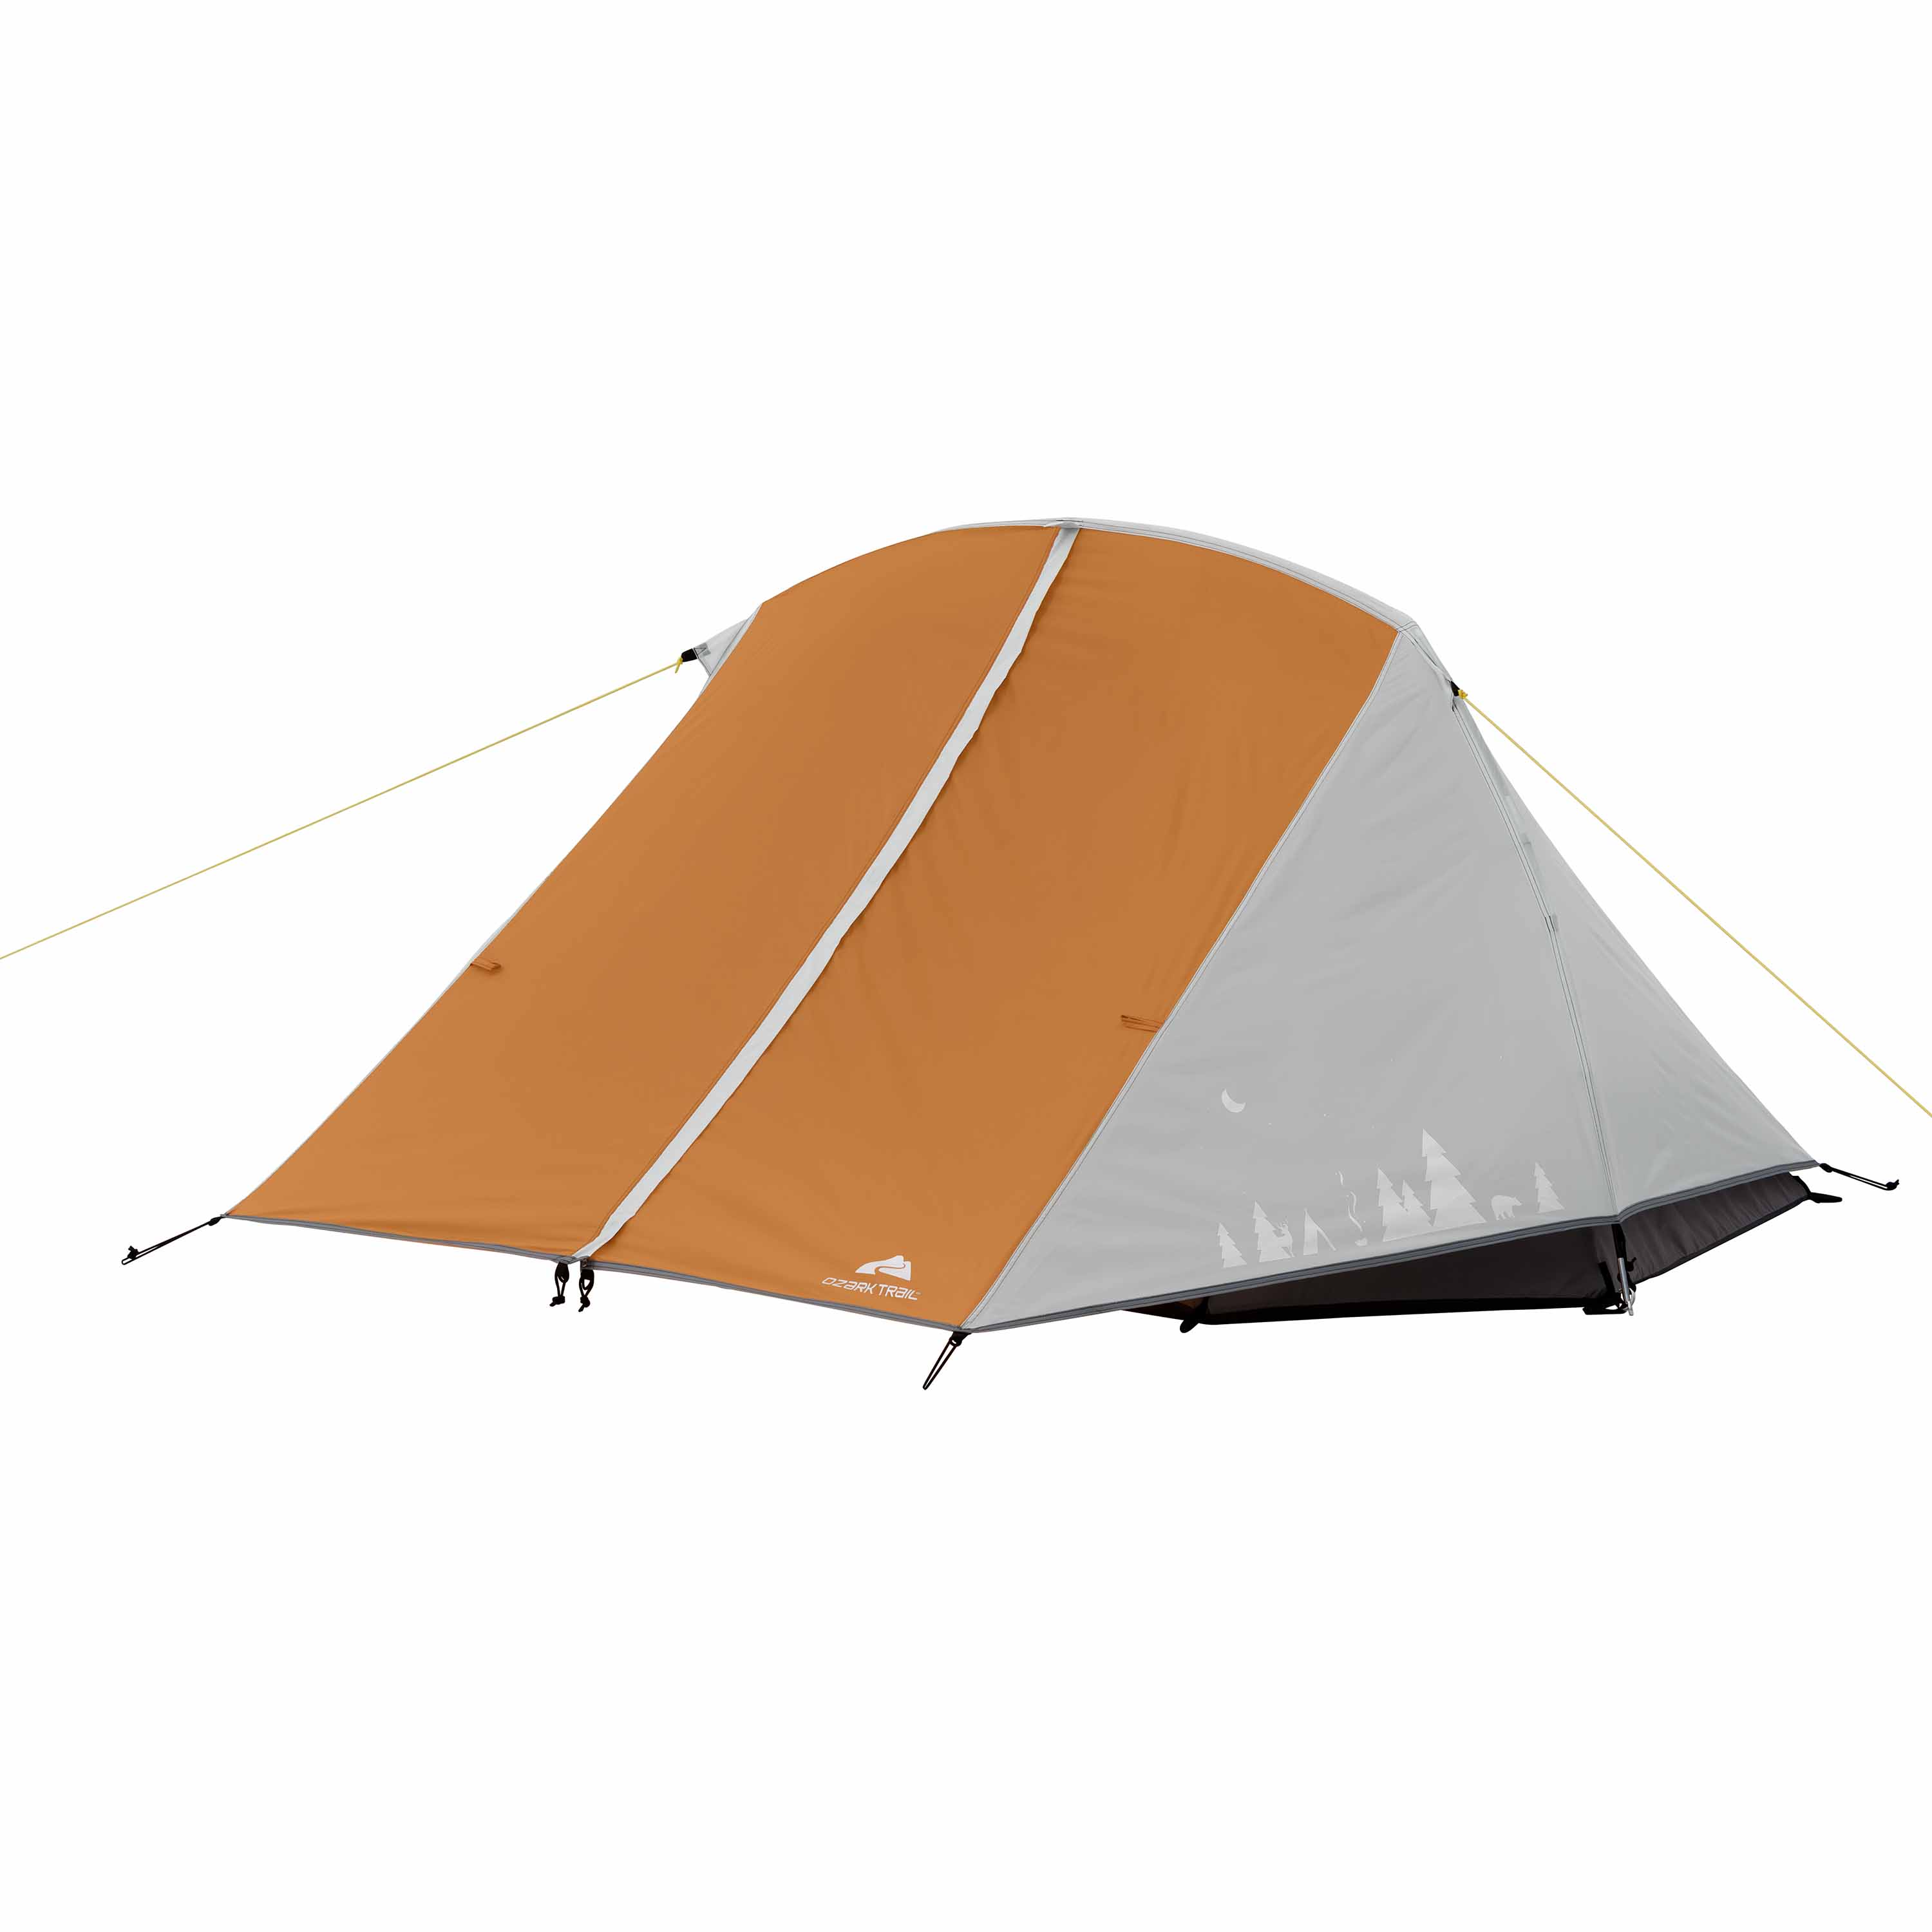 Ozark Trail Kid's Tent Combo - Tent, Sleeping Pads & Chairs Included - image 3 of 9